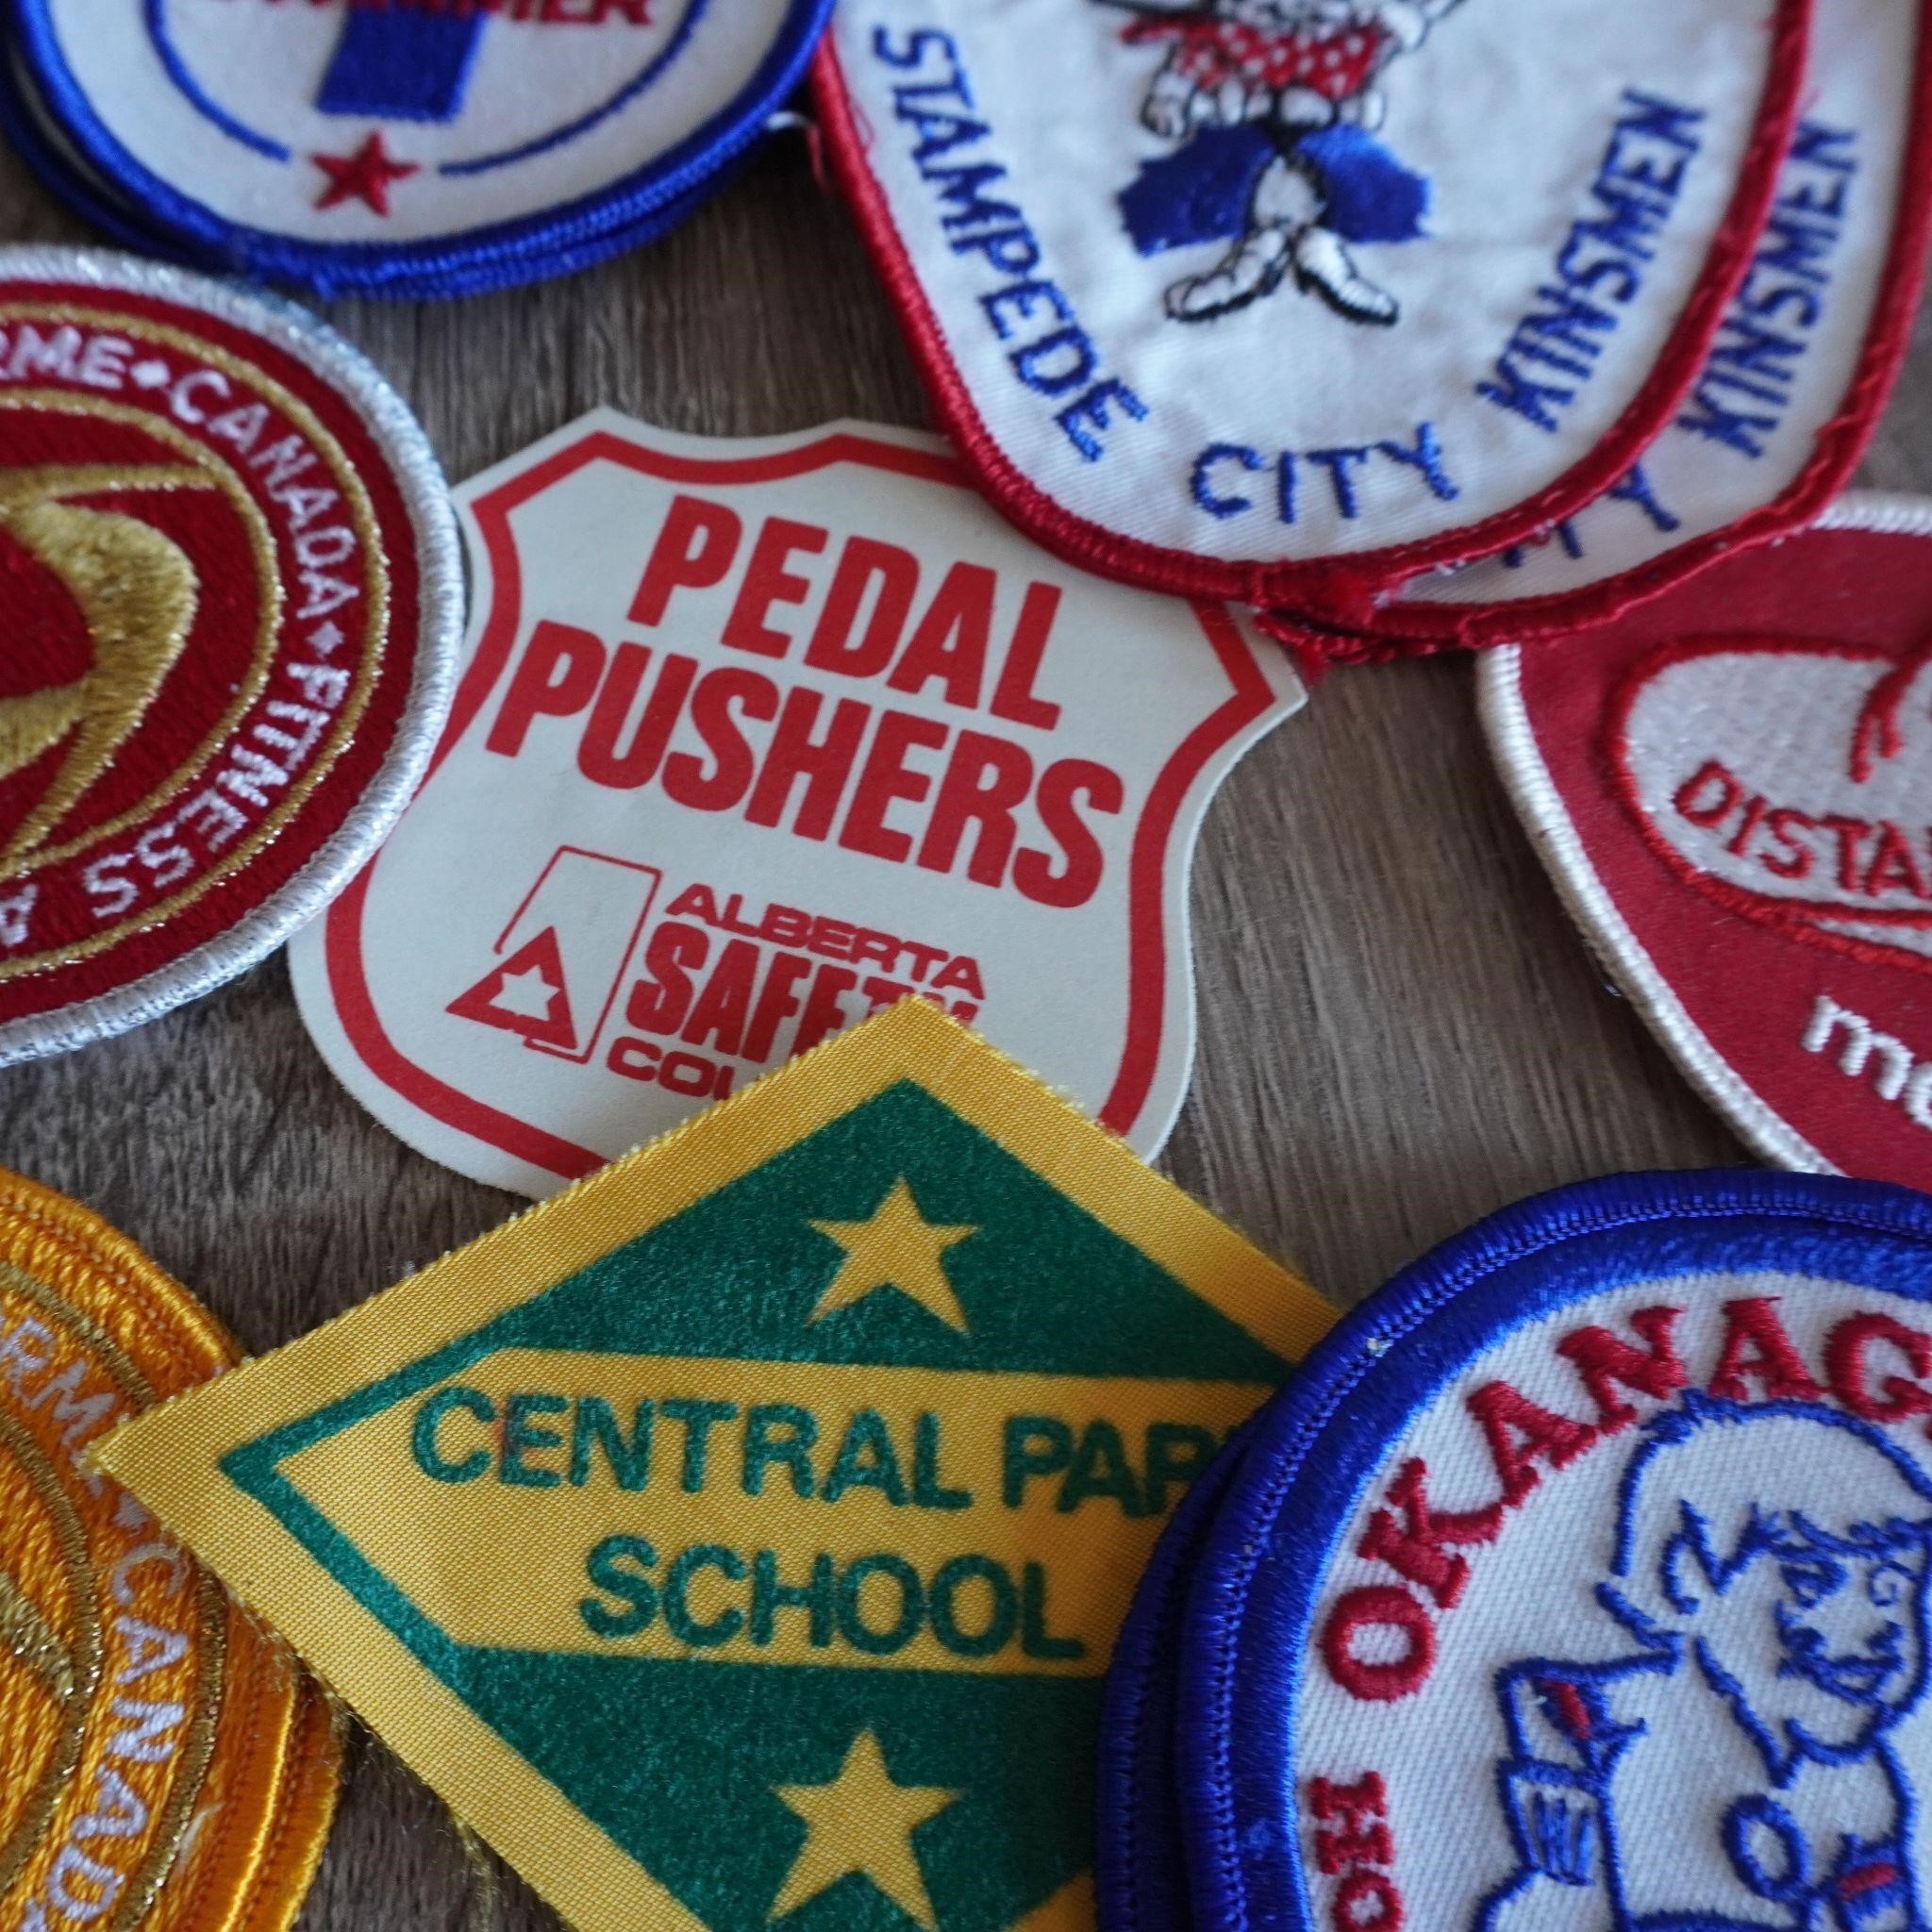 Assorted patches